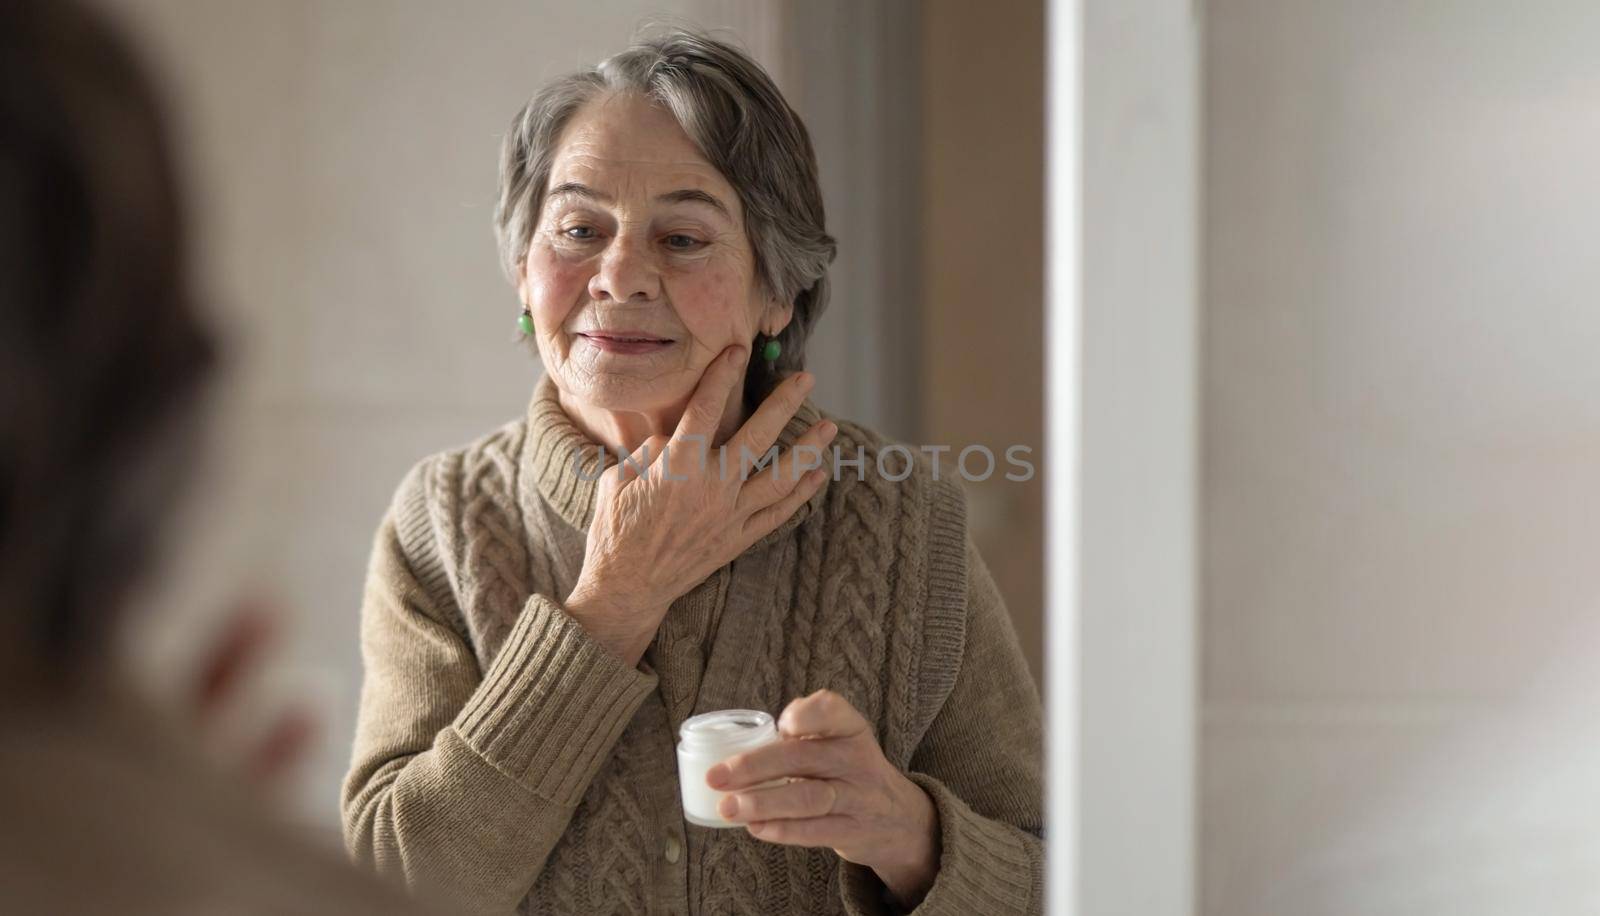 An elderly woman applies an anti-aging moisturizer. The pensioner looks after her appearance, makes cosmetic procedures in the bathroom. Uses cream for skin rejuvenation, regeneration, lifting.